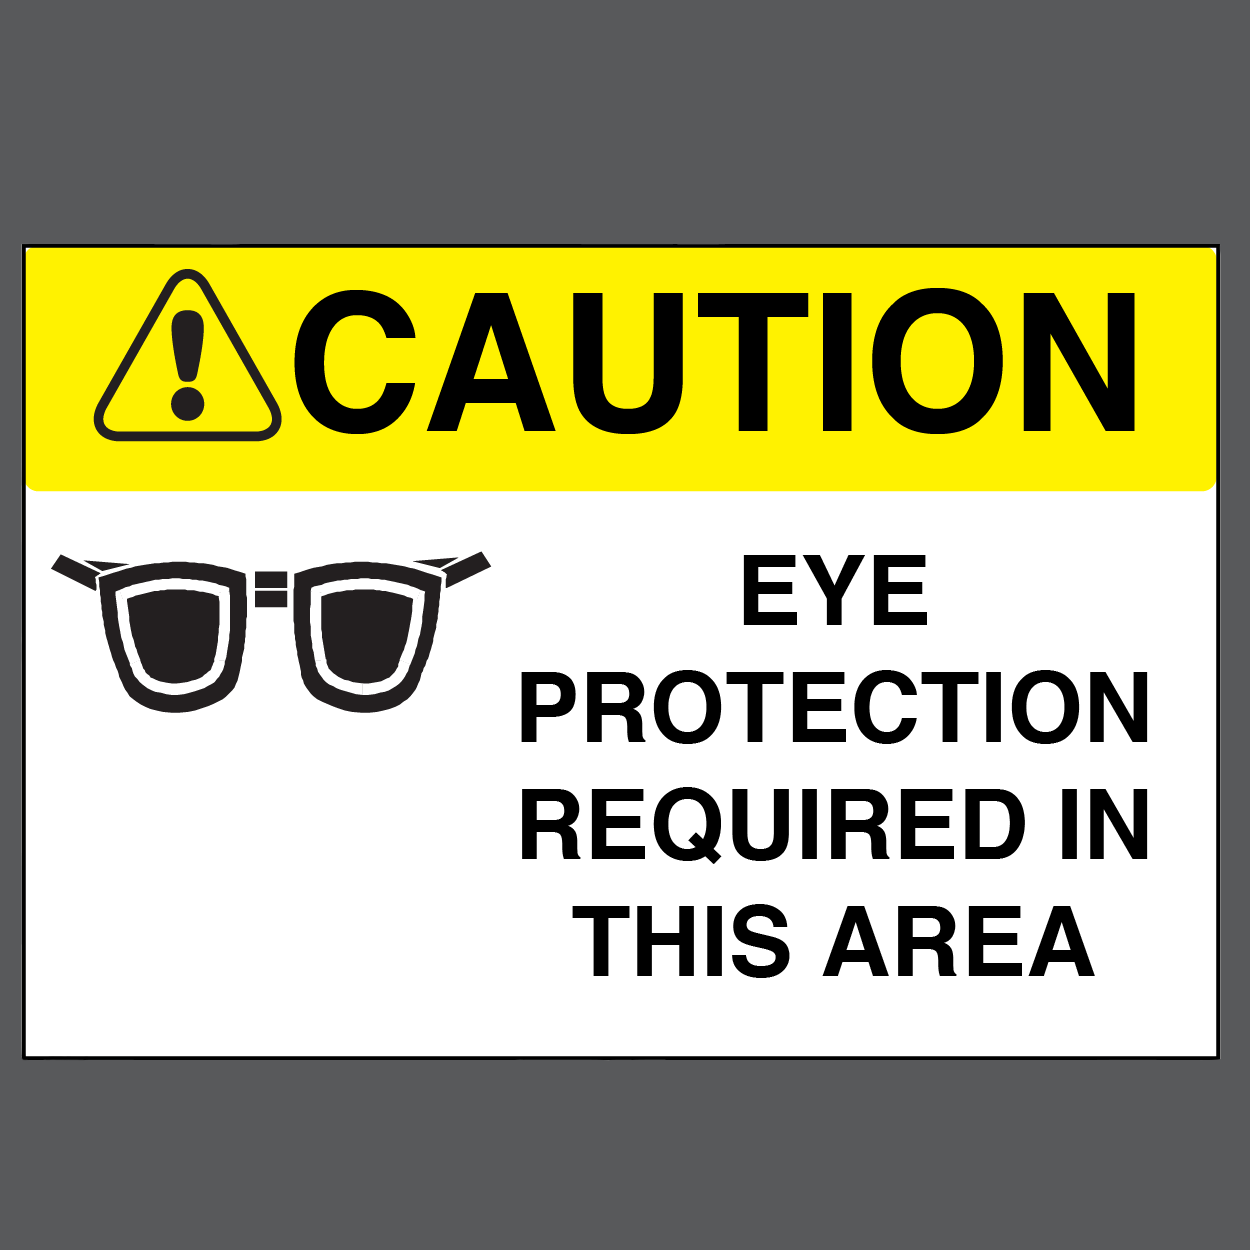 Caution "Eye Protection Required in This Area" Durable Matte Laminated Vinyl Floor Sign- Various Sizes Available